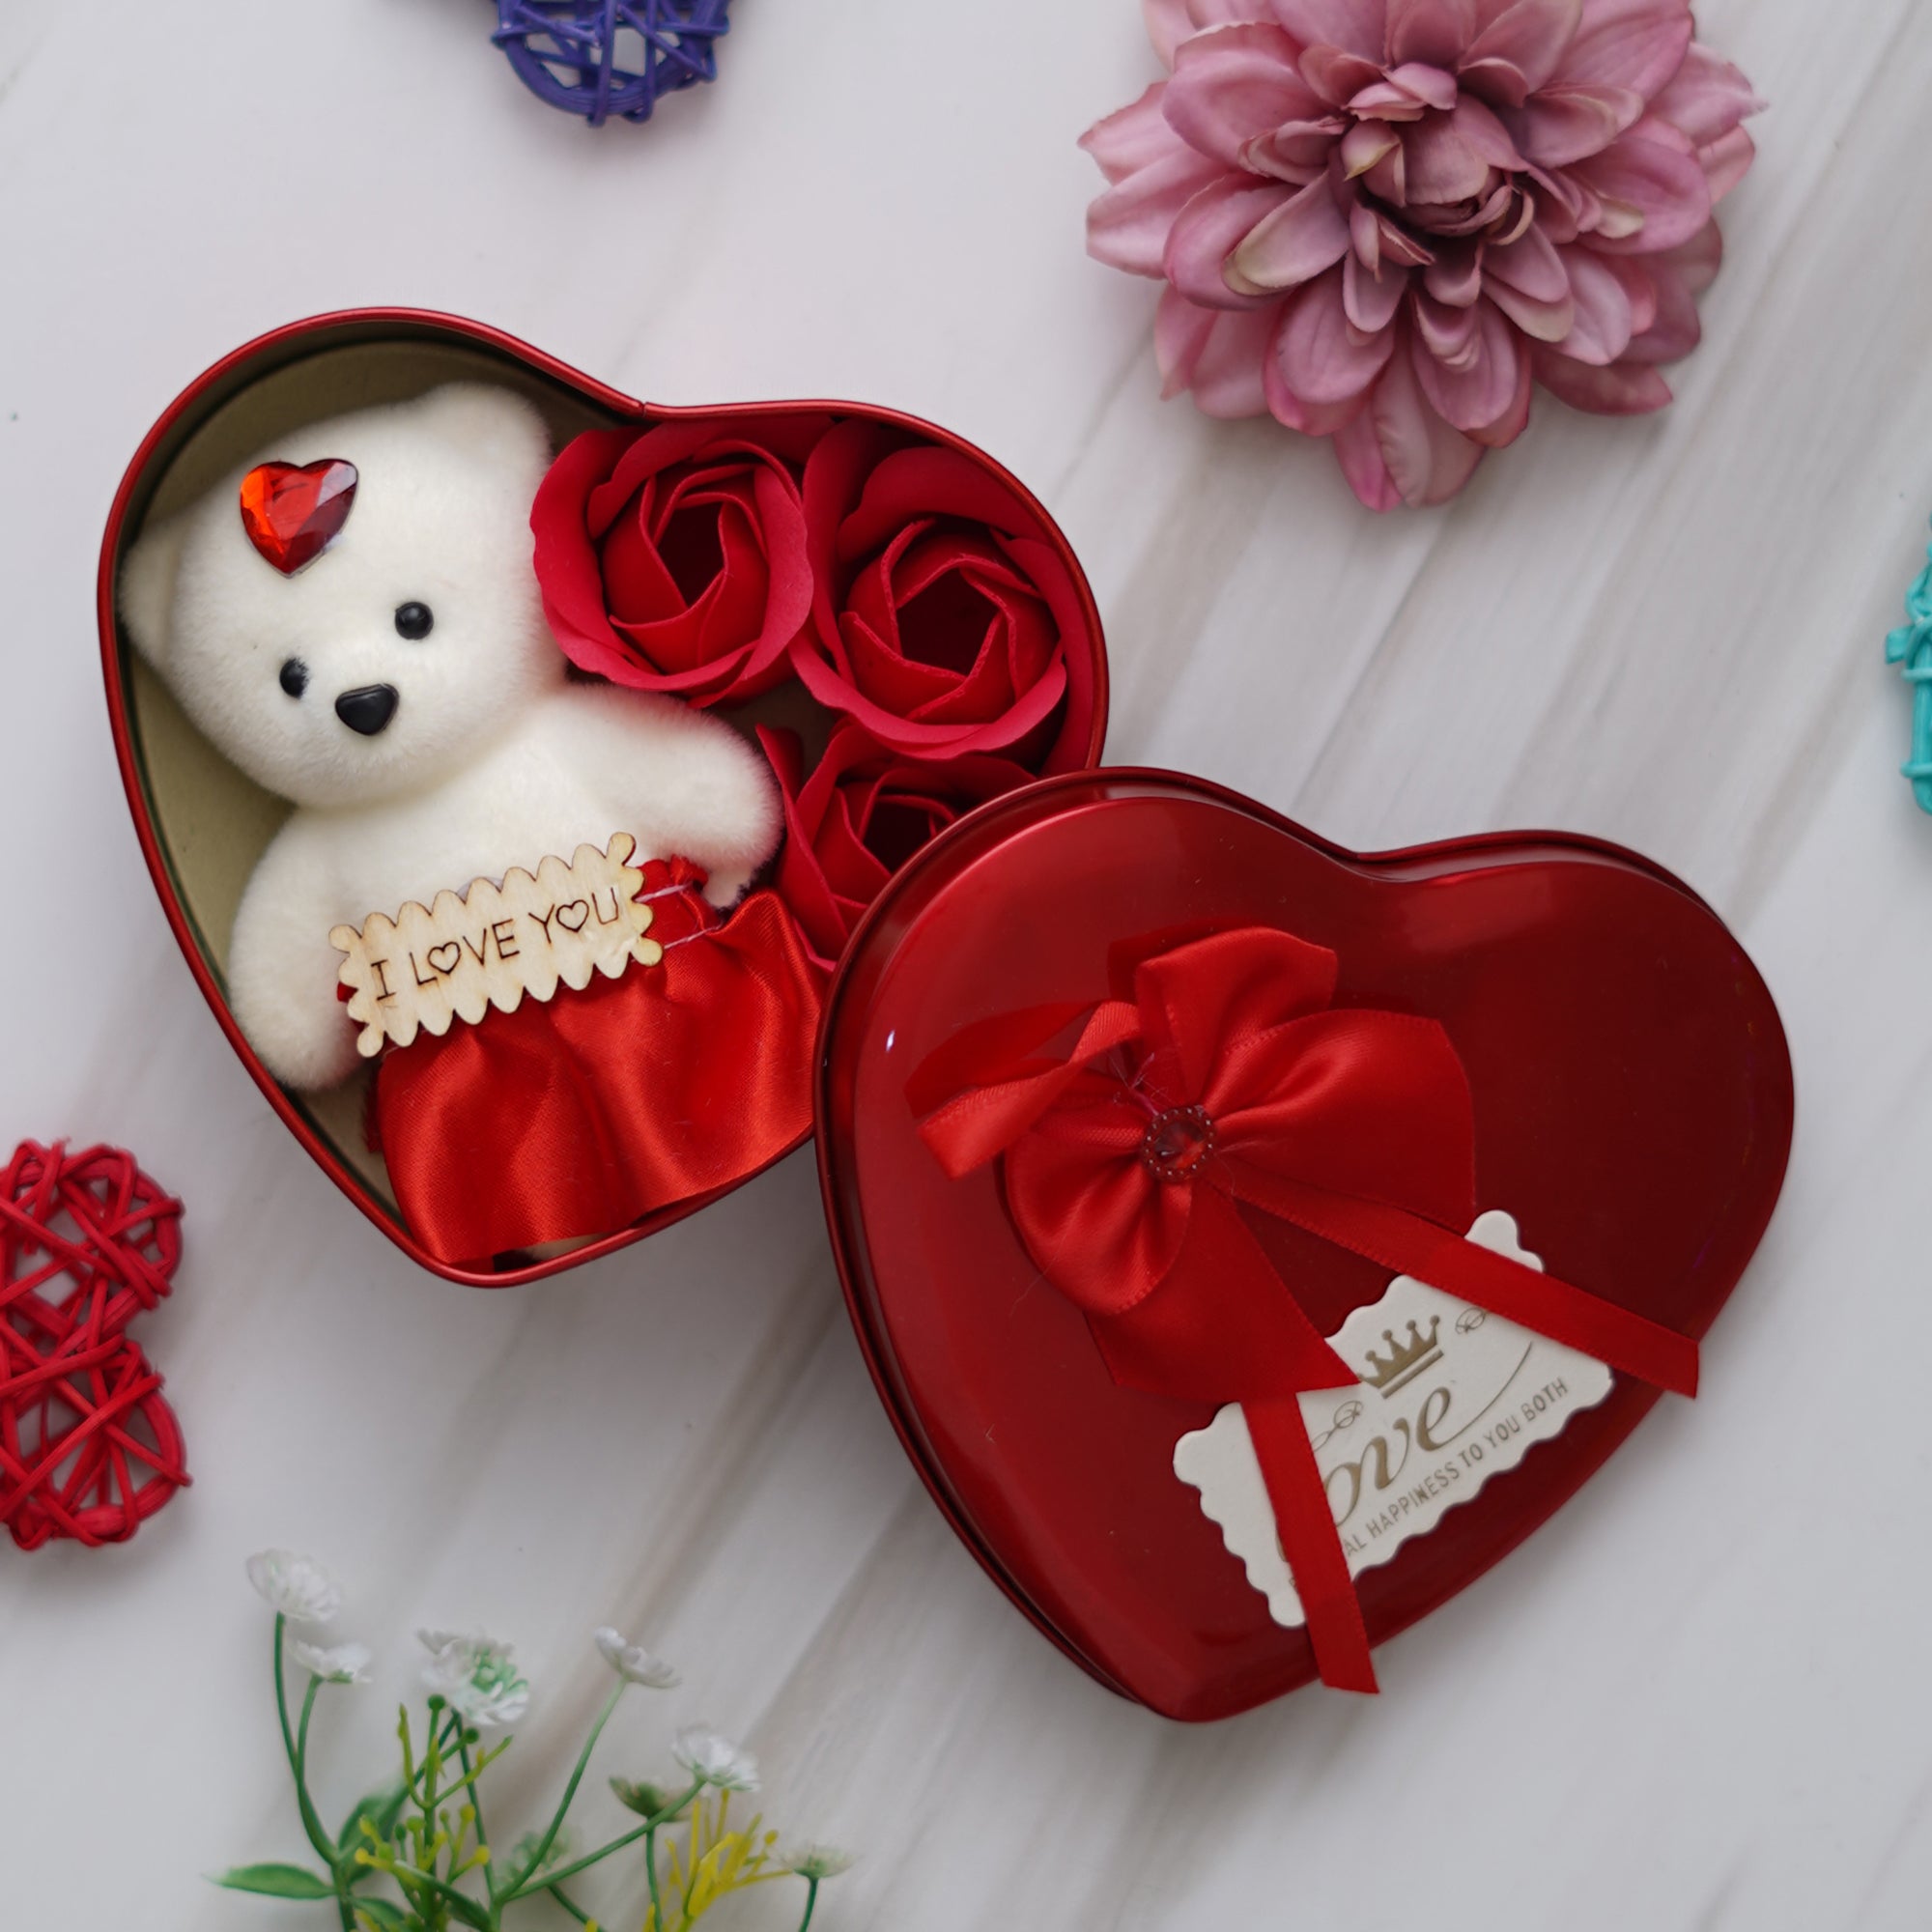 Valentine Combo of Golden Red Rose Gift Set, "My Heart Beats Only For You" Wooden Showpiece With Stand, Heart Shaped Gift Box Set with White Teddy and Red Roses 5